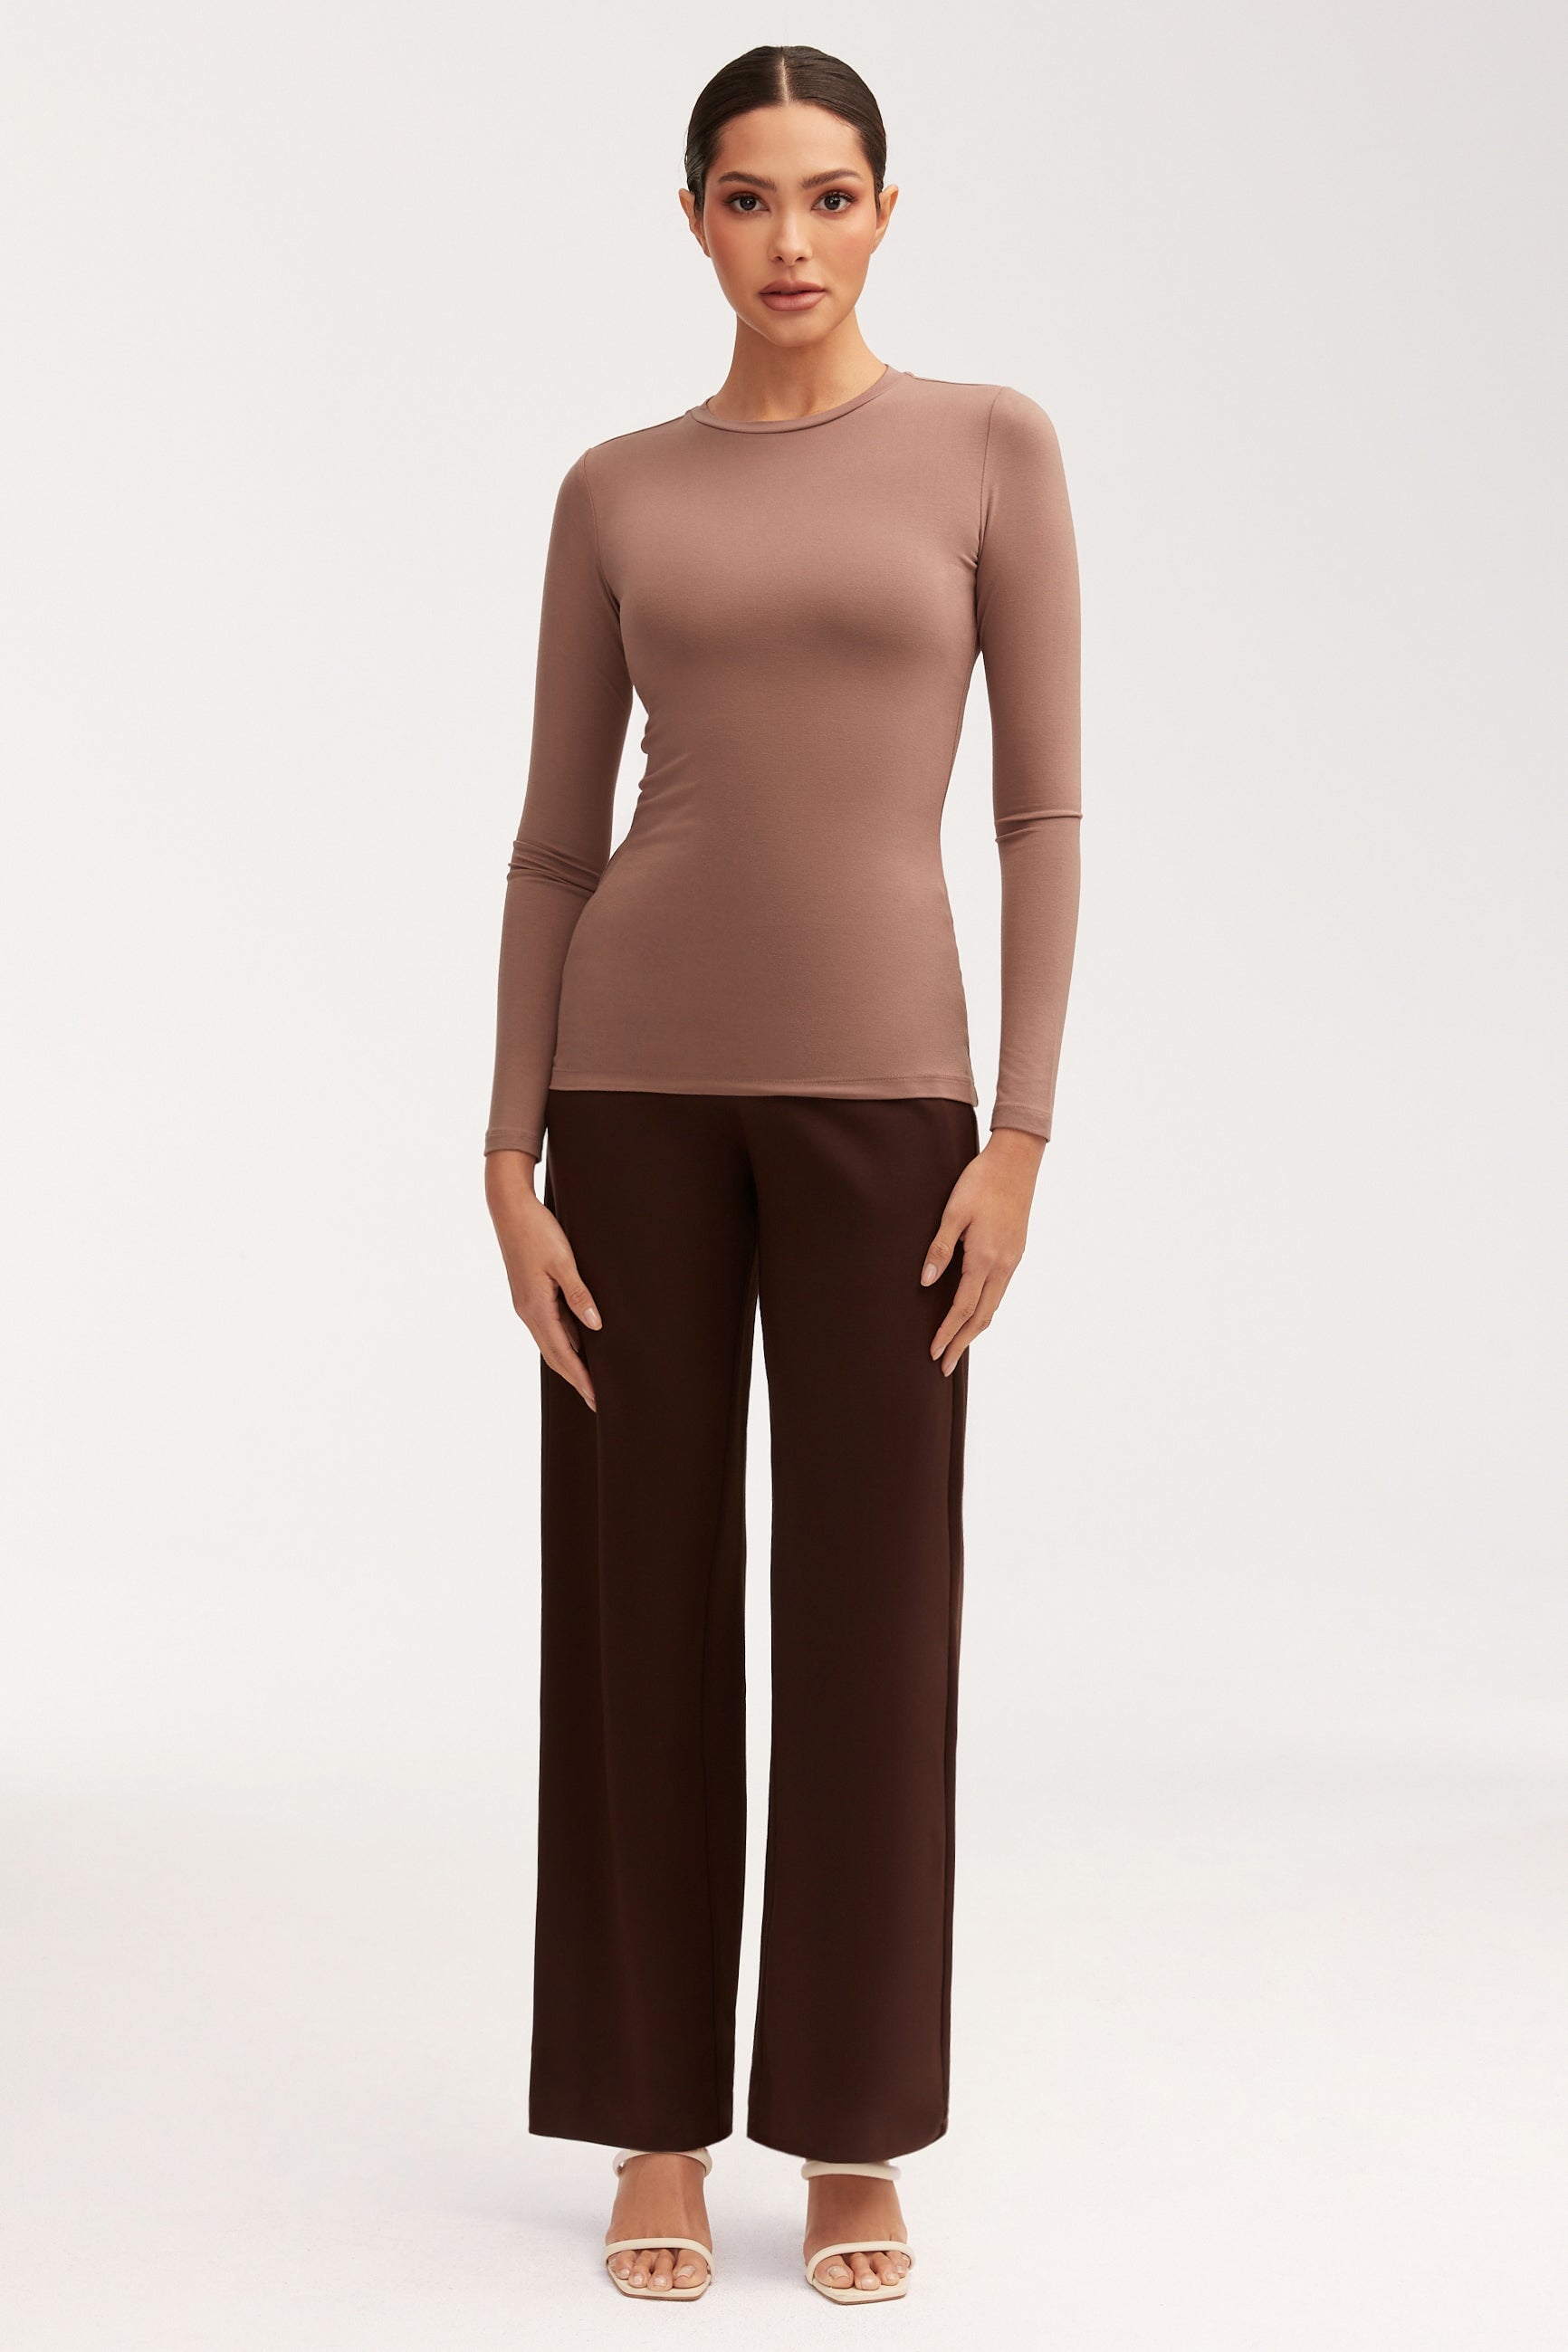 Essential Crew Neck Bamboo Jersey Top - Deep Taupe Tops Veiled 